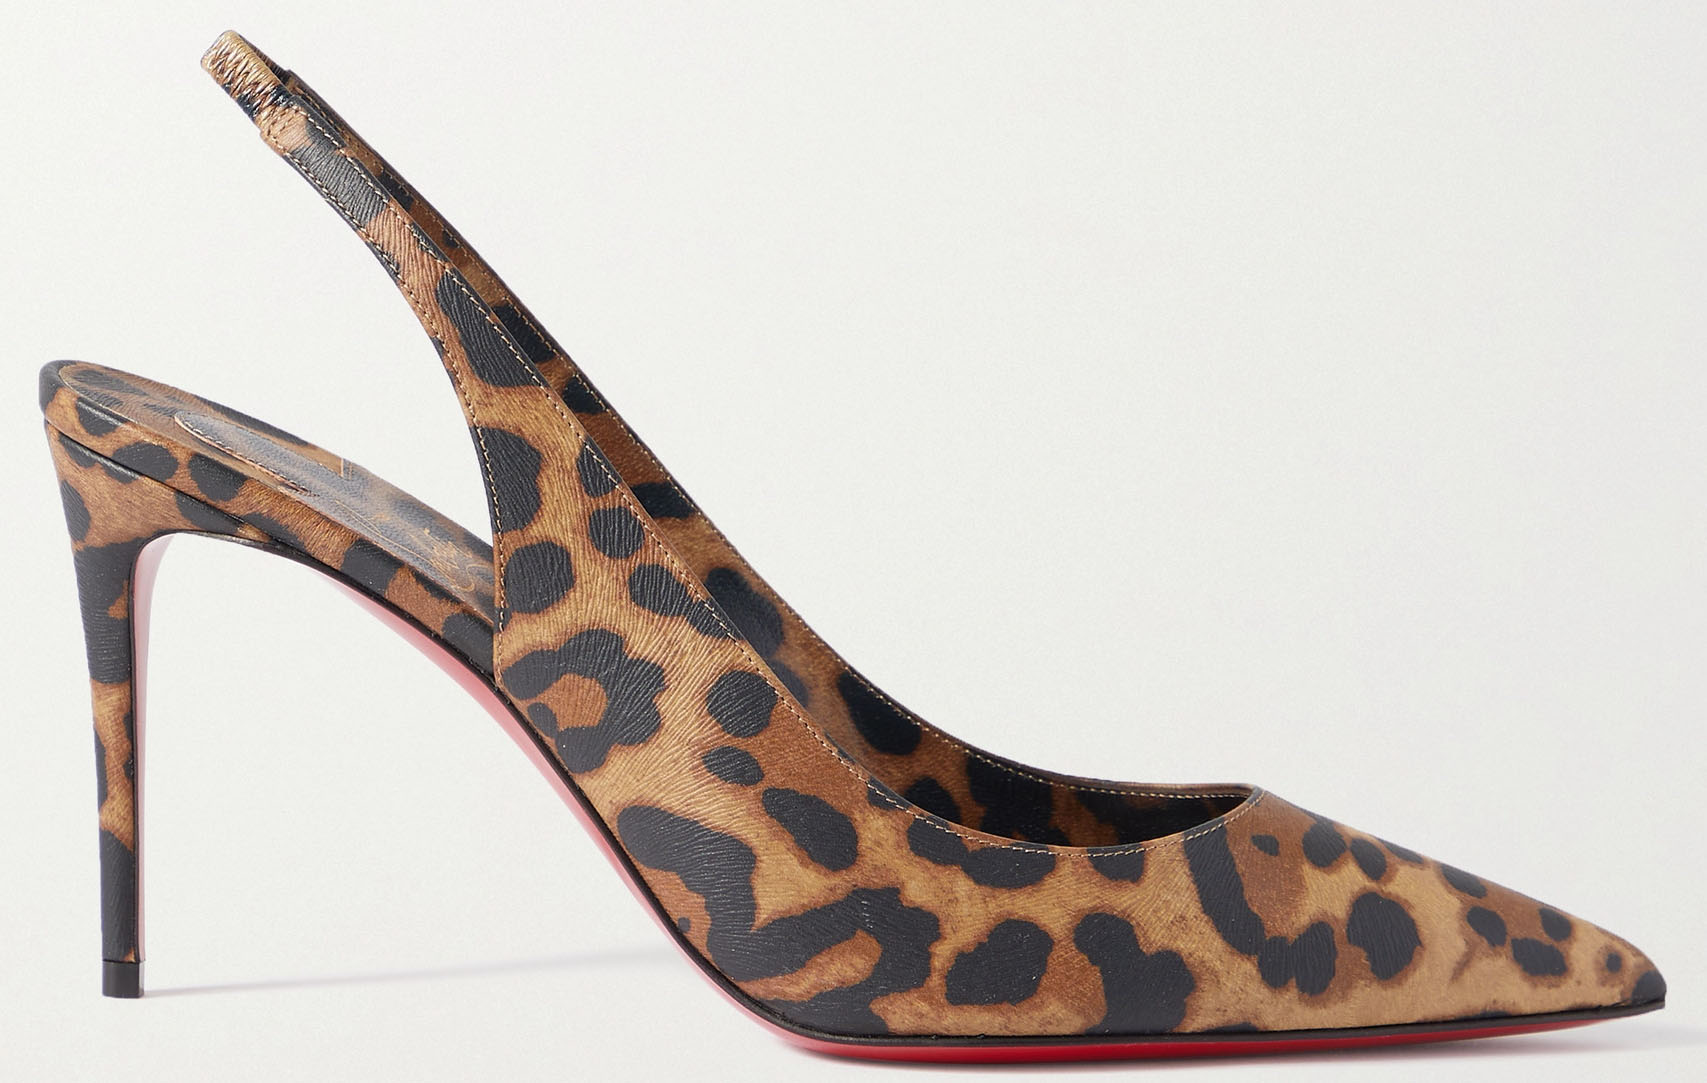 Made in Italy from leopard-print leather, the "Kate" slingback pumps feature pointed toes and about 3-inch heels